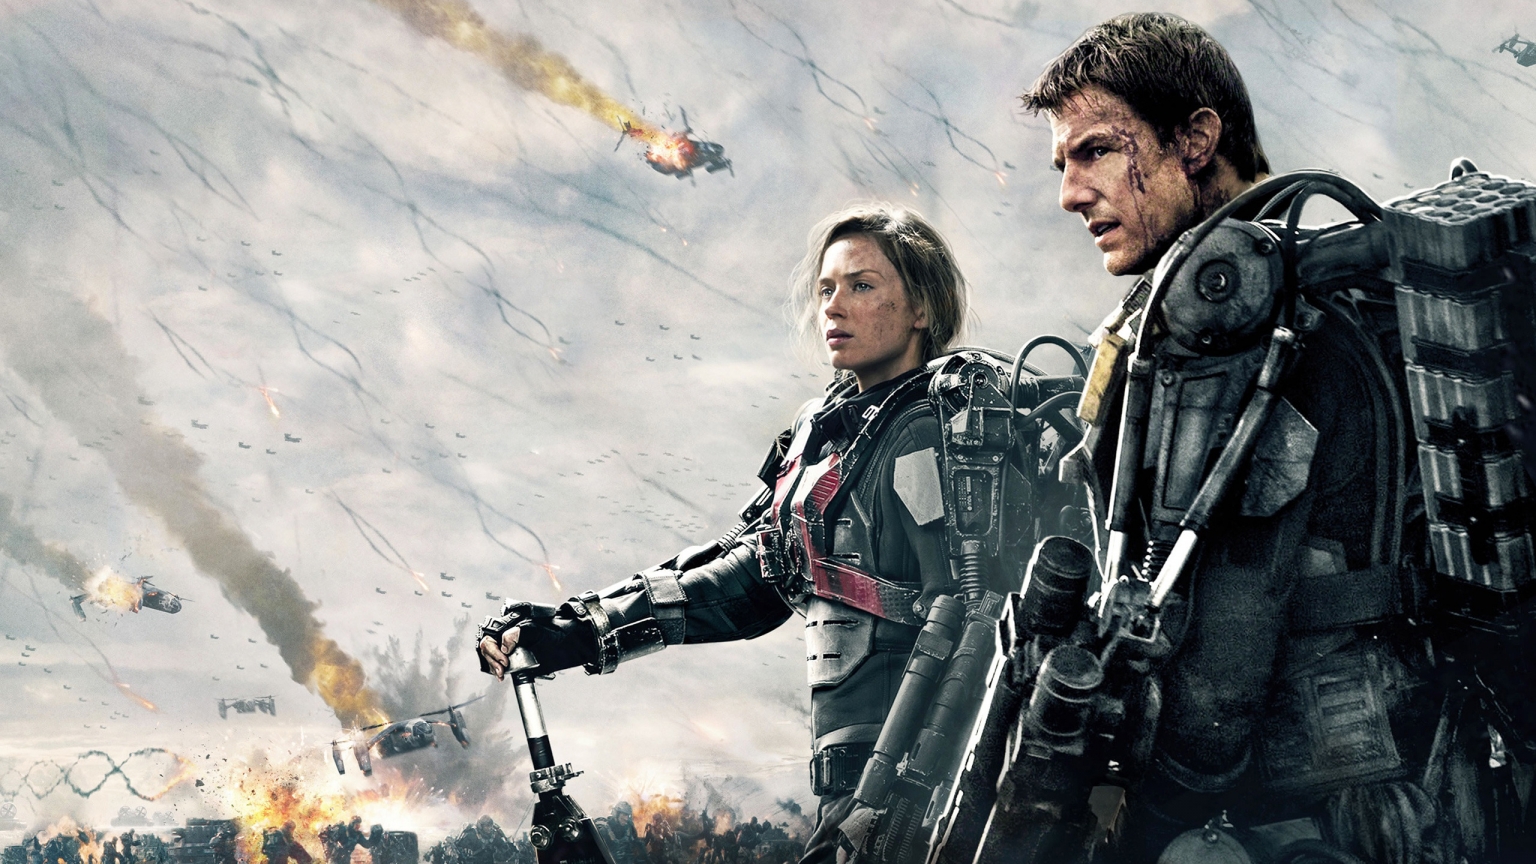 Edge of Tomorrow 2014 for 1536 x 864 HDTV resolution